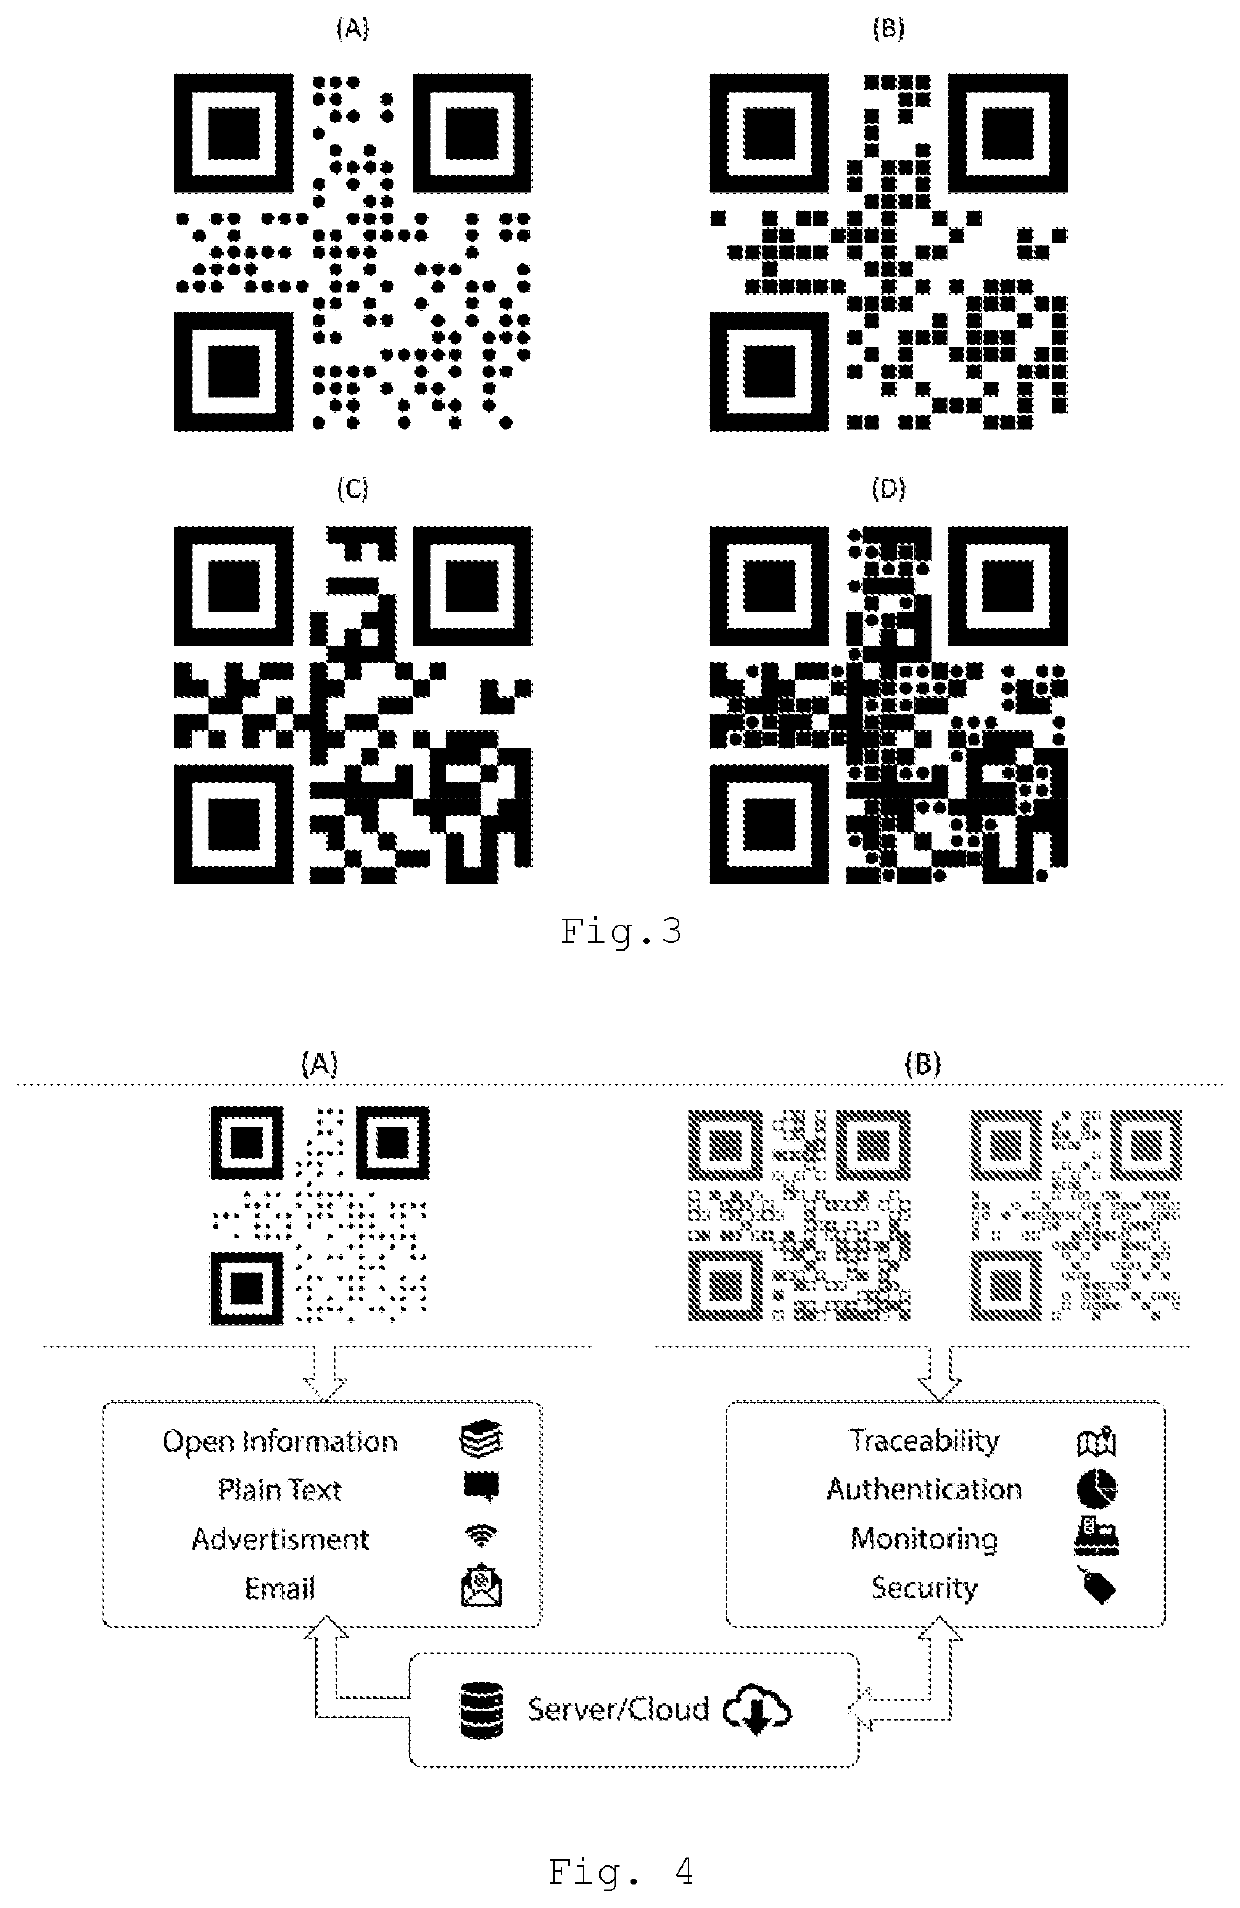 Multiplexed luminescent qr codes for smart labelling, for measuring physical parameters and real-time traceability and authentication